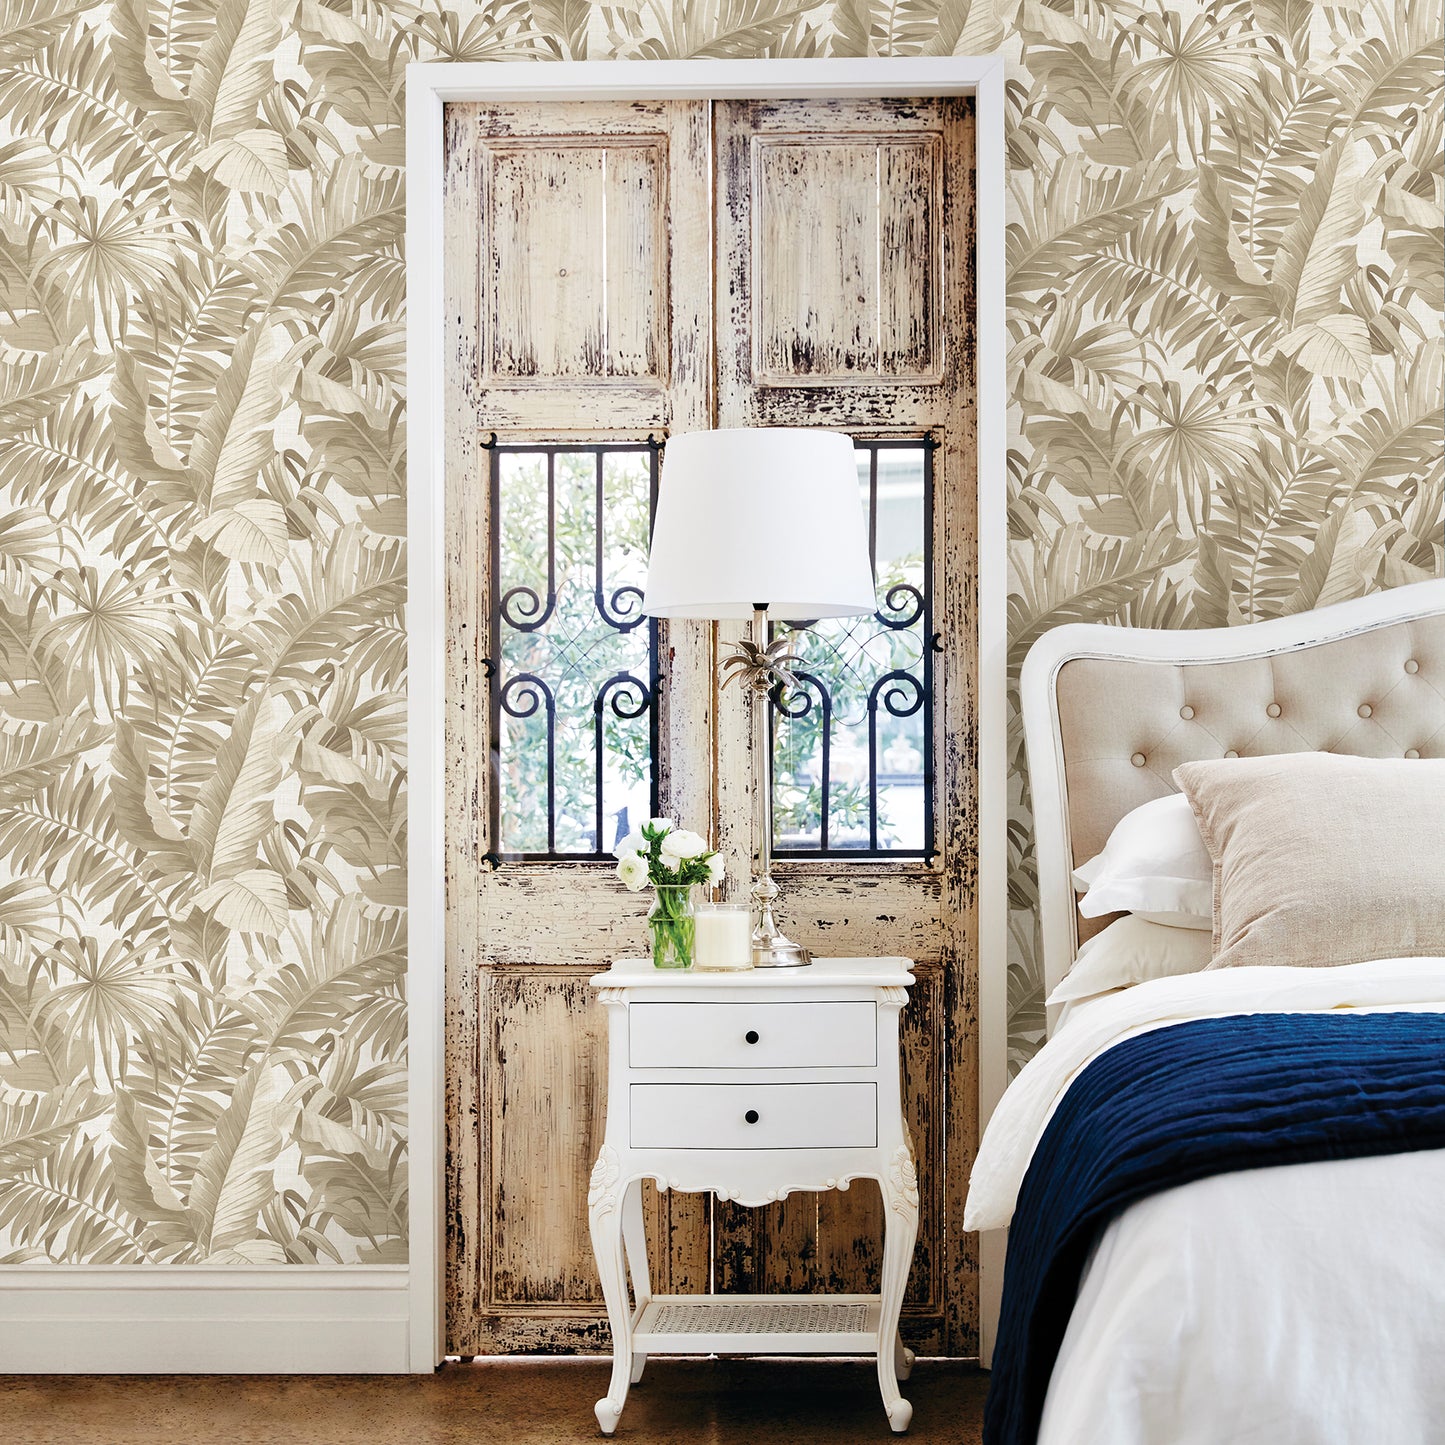 Select 2744-24135 Solstice Taupe Botanical A-Street Prints Wallpaper